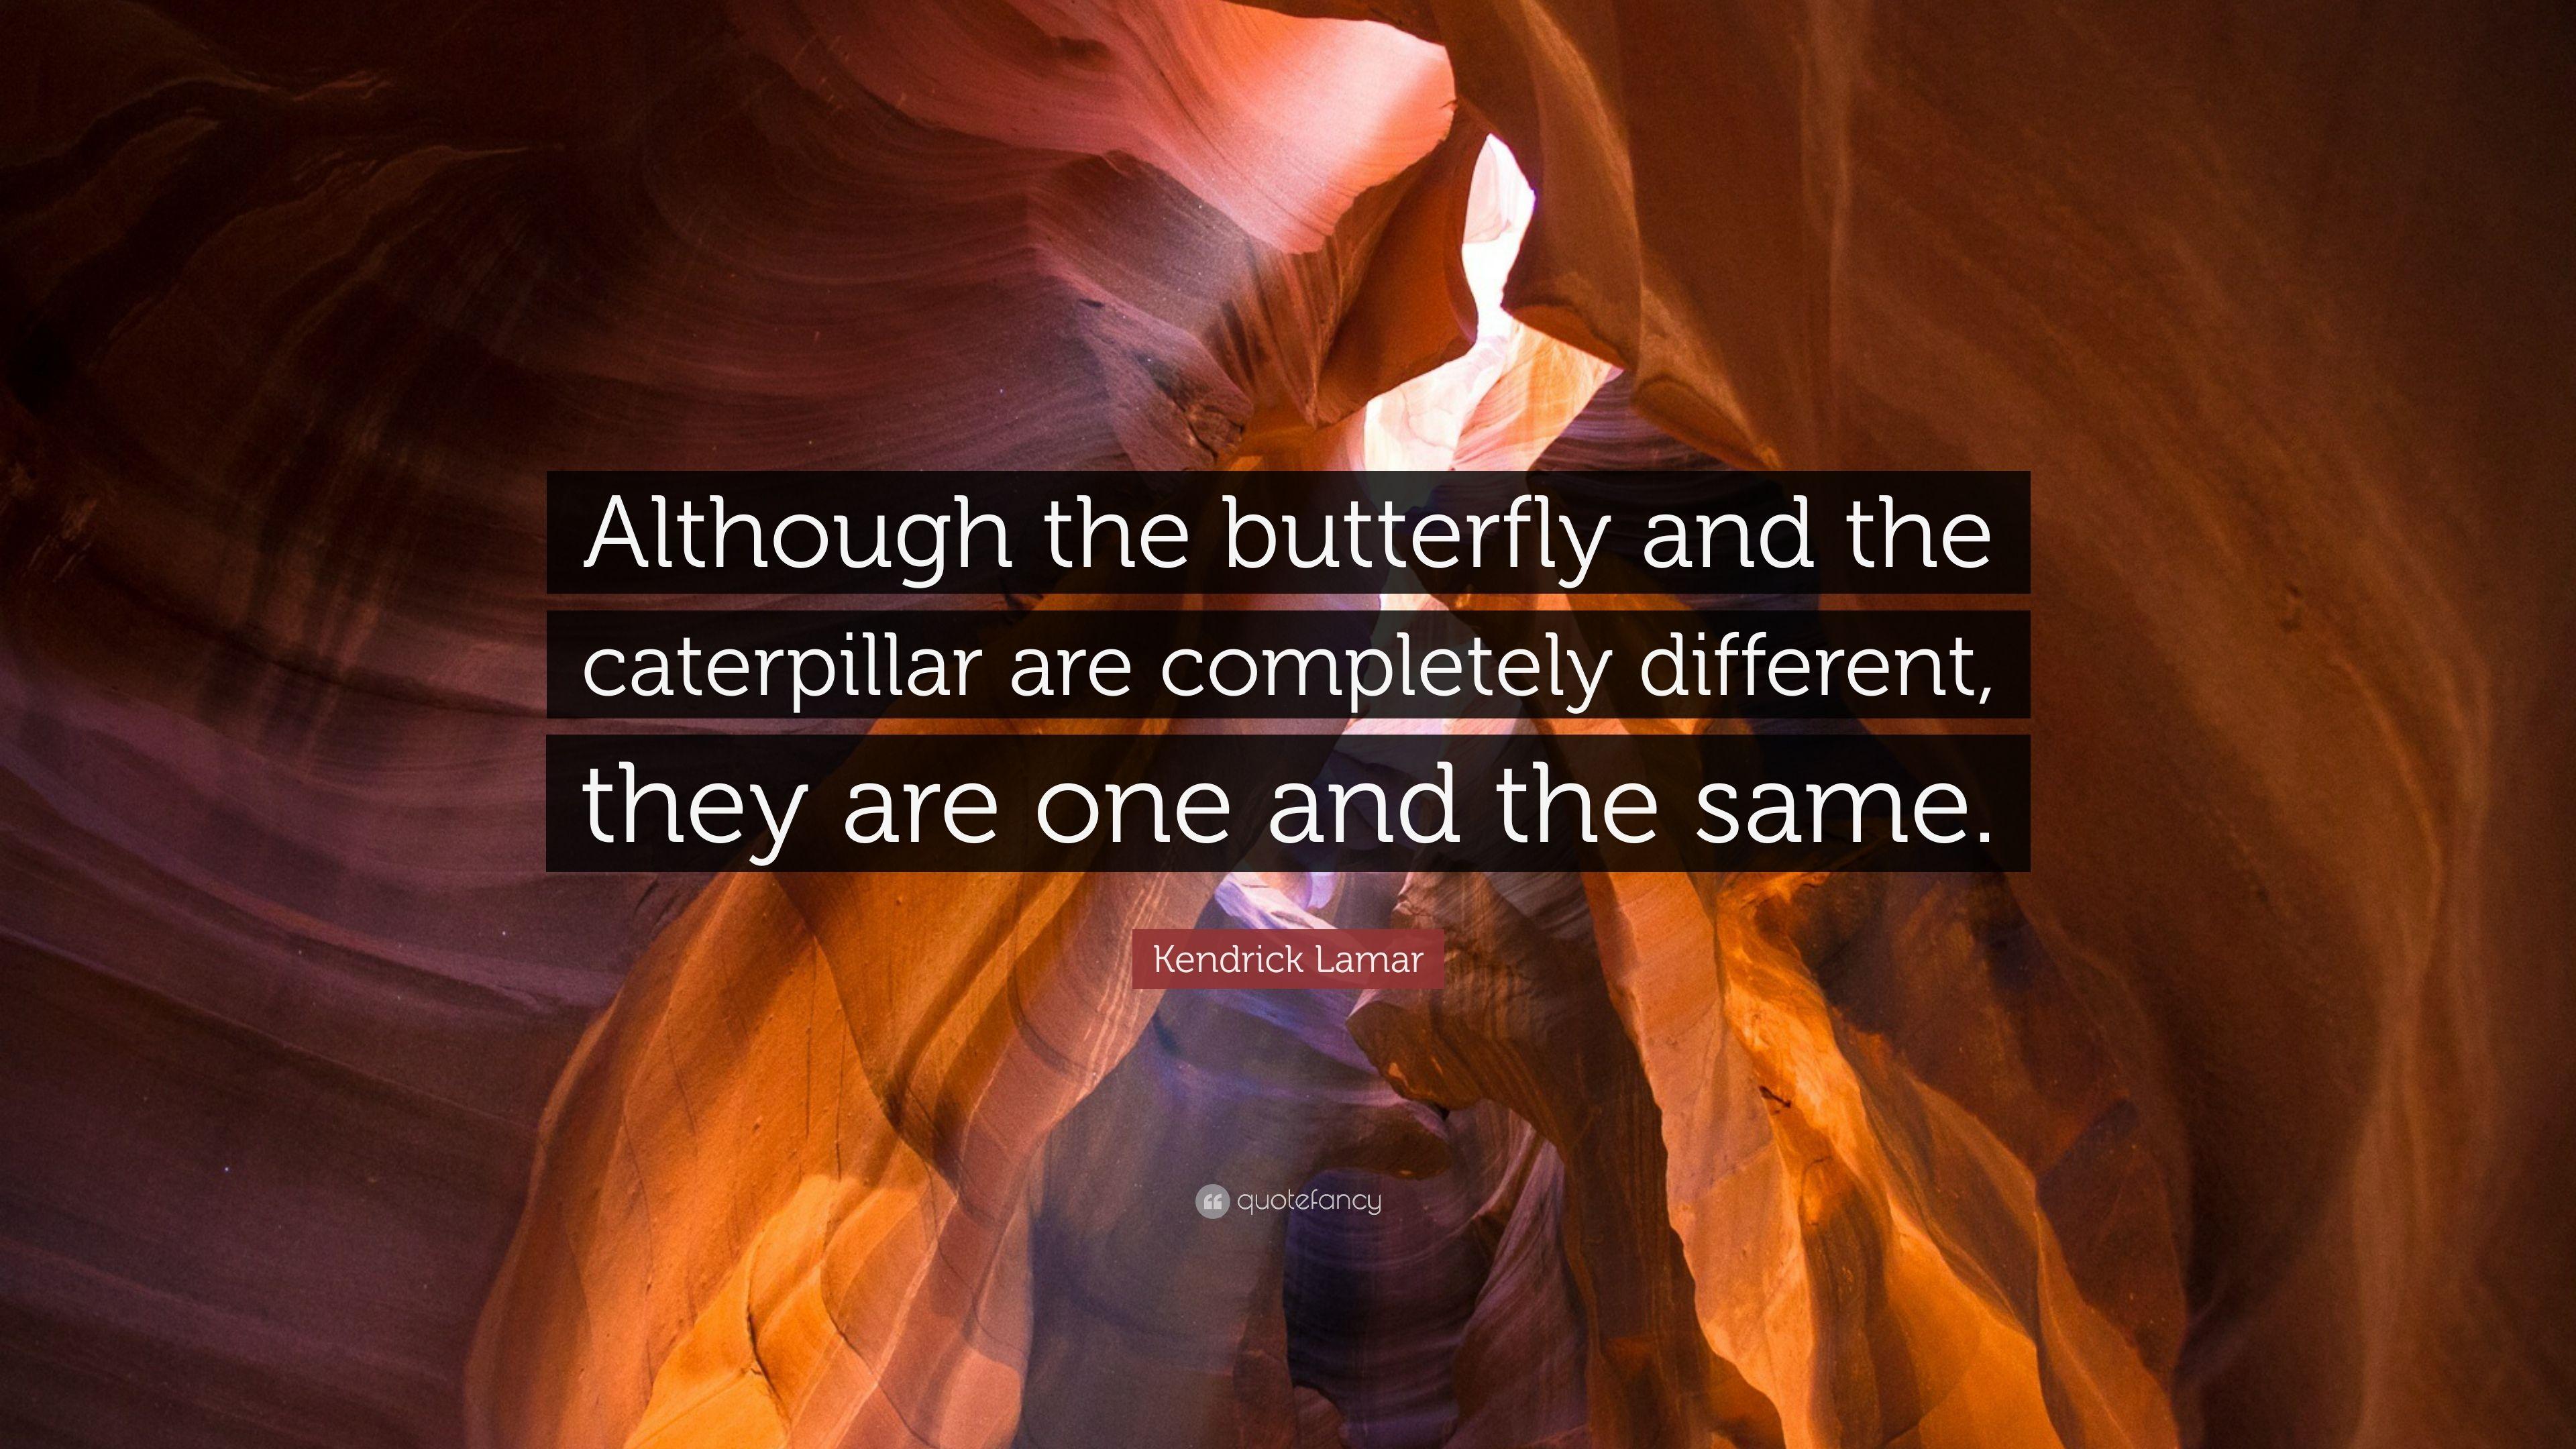 Kendrick Lamar Quote: “Although the butterfly and the caterpillar are completely different, they are one and the same.” (10 wallpaper)